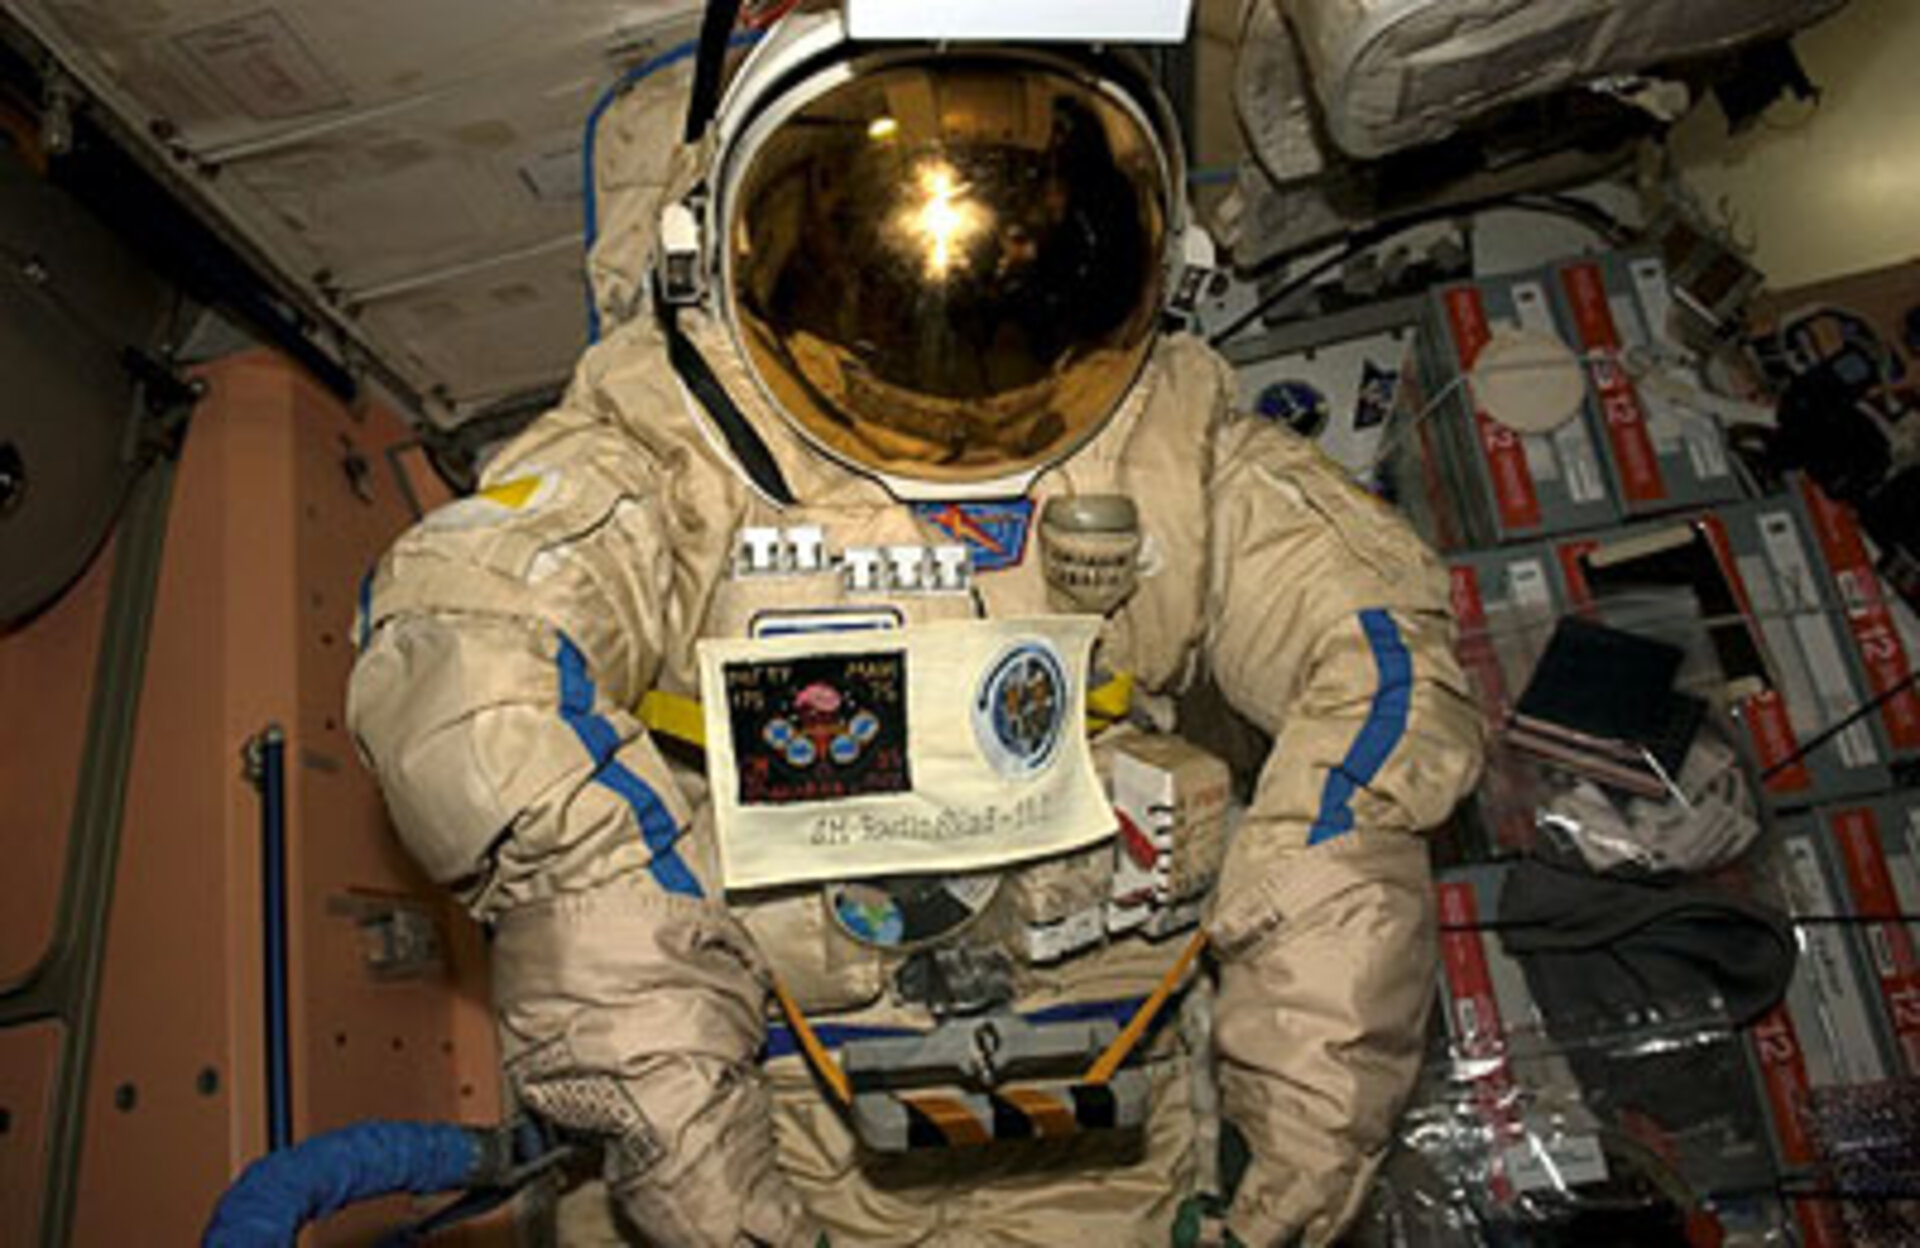 SuitSat in flight configuration. On the top of the helmet  is the electronics control panel along with the SuitSat antenna.